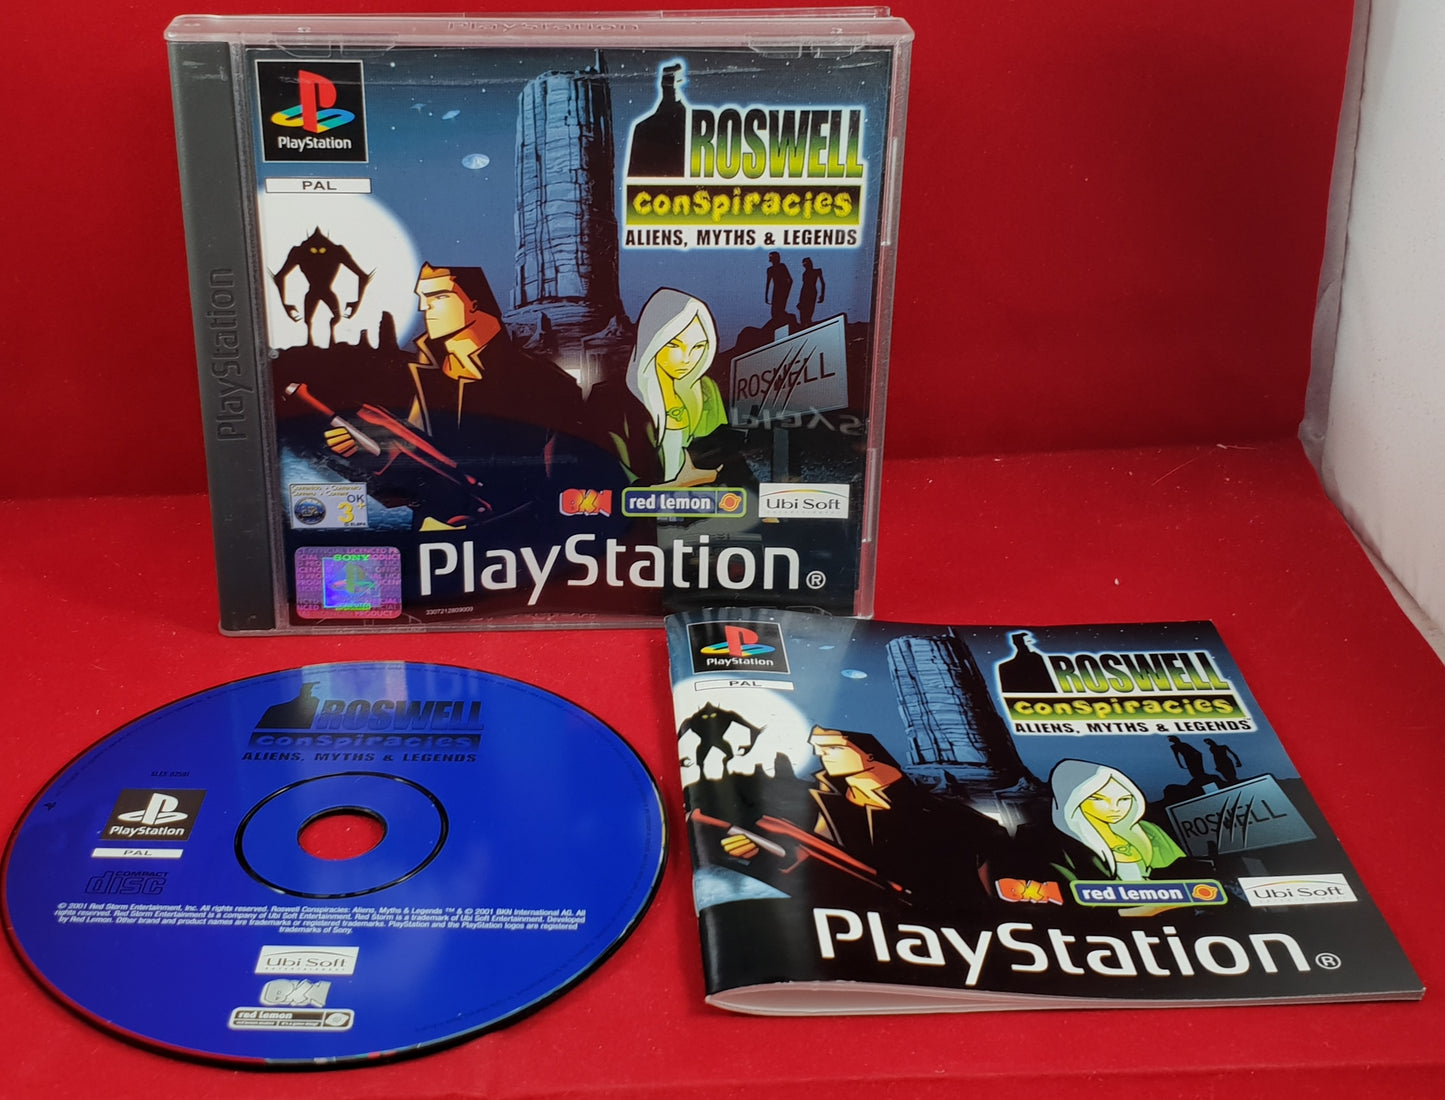 Roswell Conspiracies Aliens, Myths & Legends Sony Playstation 1 (PS1) Game